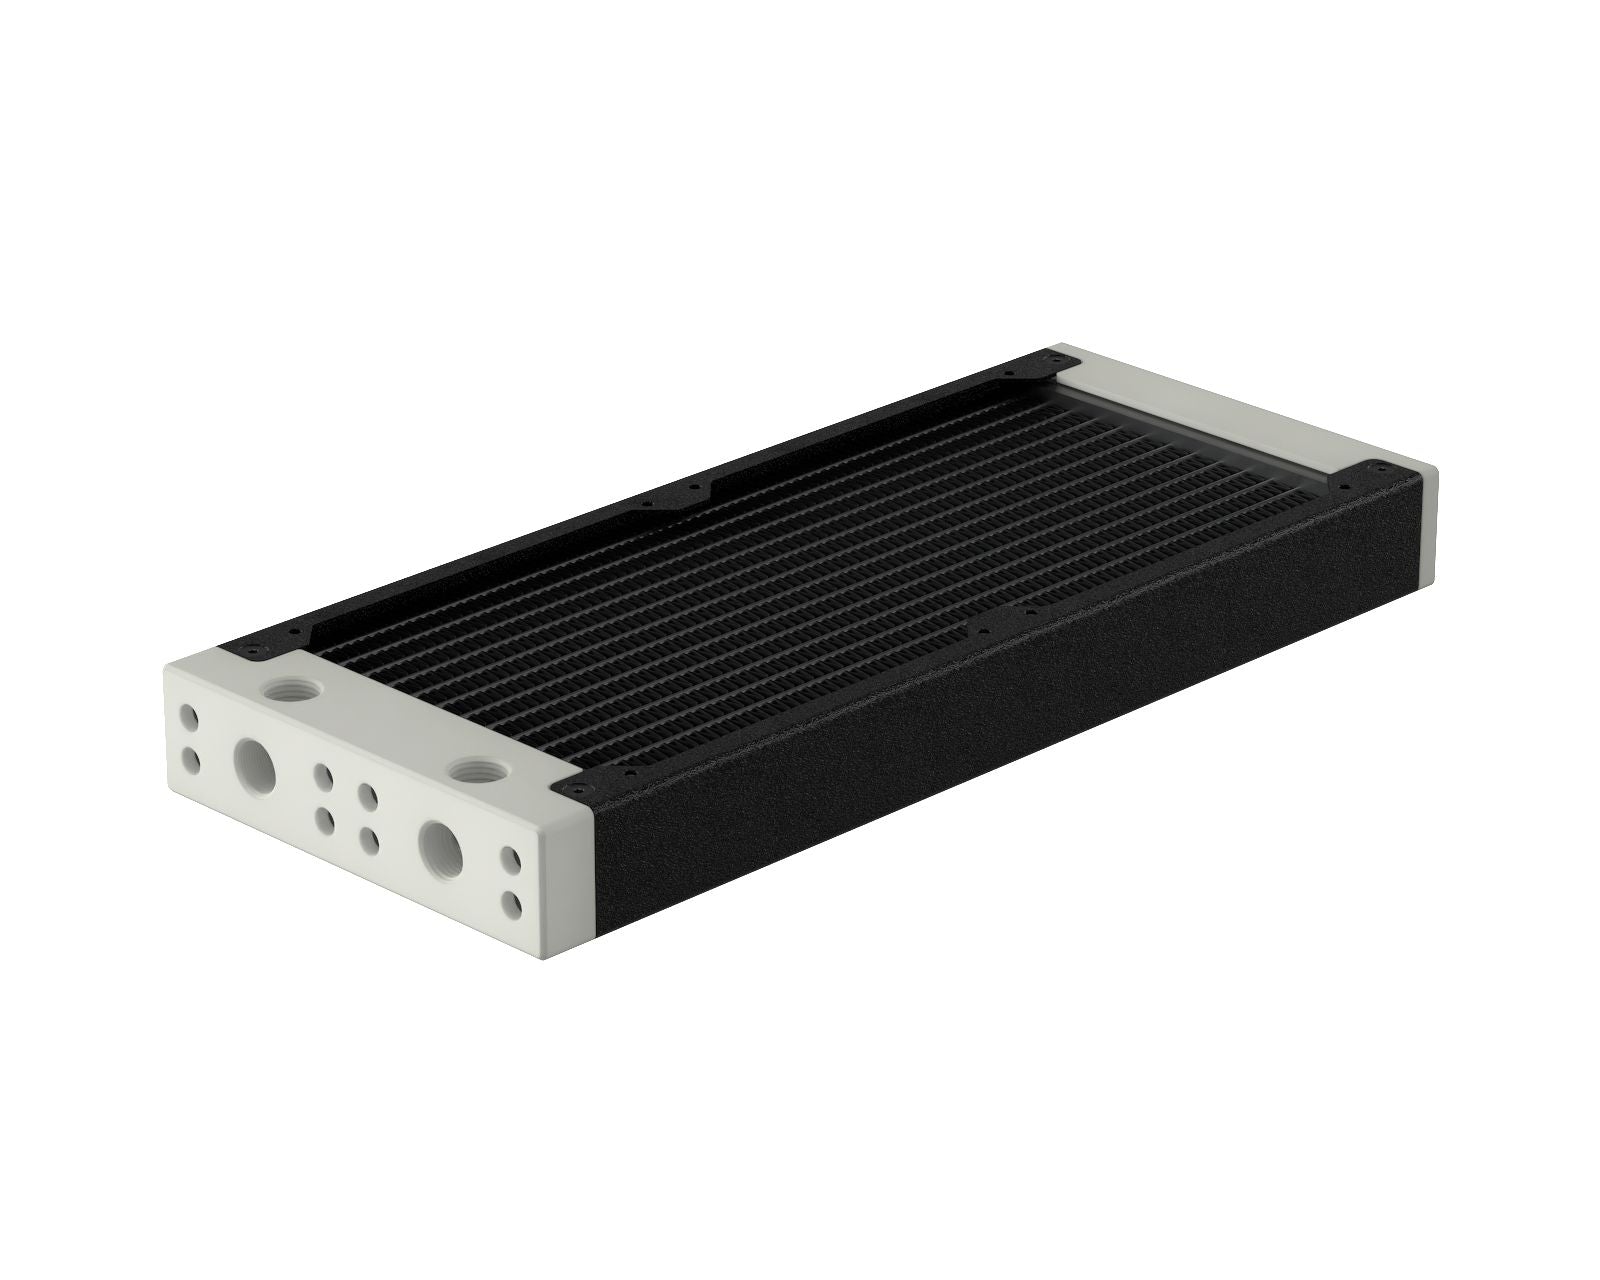 PrimoChill 240SL (30mm) EXIMO Modular Radiator, White POM, 2x120mm, Dual Fan (R-SL-W24) Available in 20+ Colors, Assembled in USA and Custom Watercooling Loop Ready - TX Matte Black